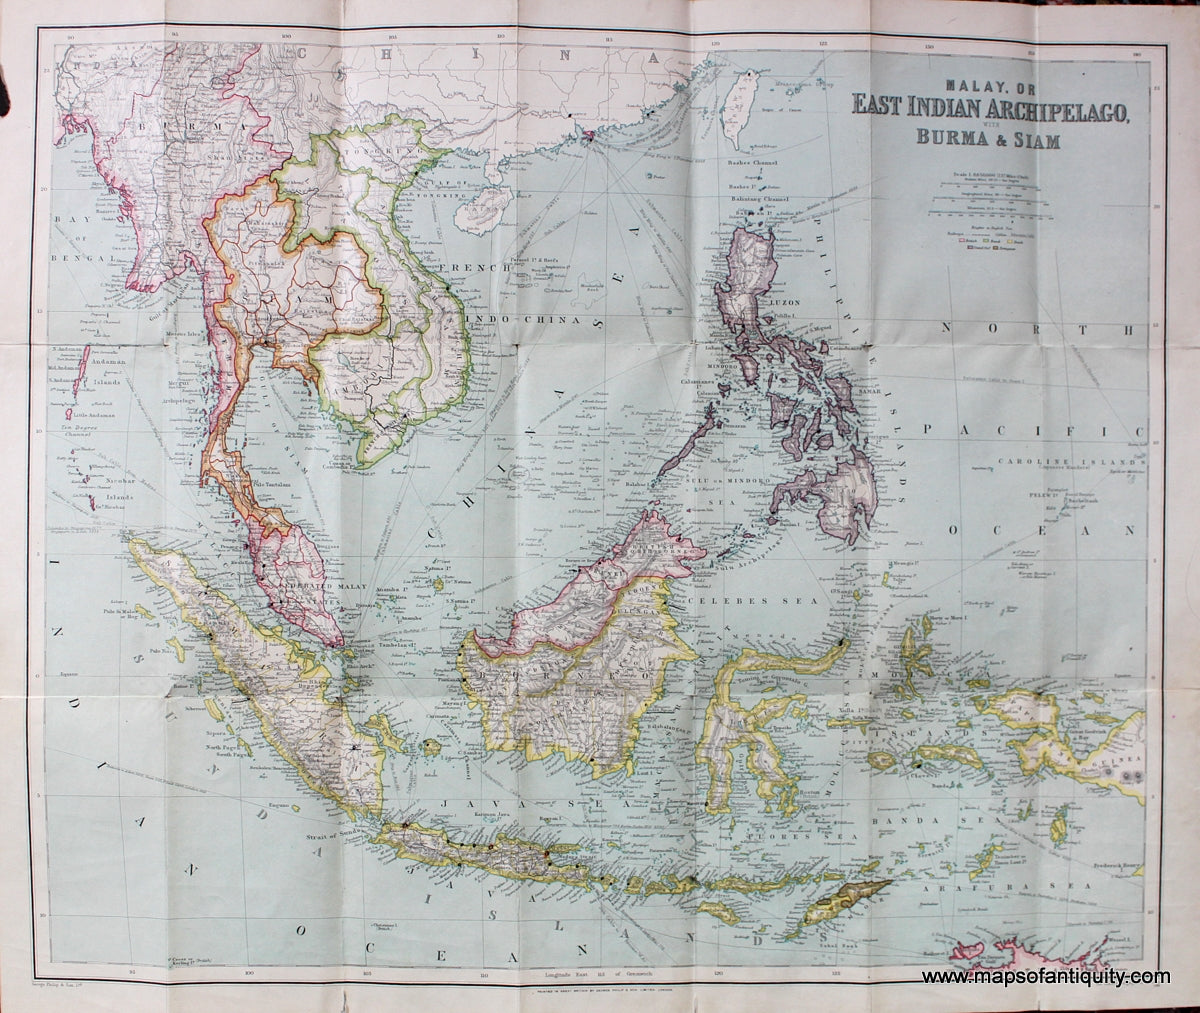 Antique-Folding-Map-East-Indies-Malay-or-East-Indian-Archipelago-with-Burma-&-Siam-East-Indies--1900-Philips'-Authentic-Imperial-Maps-Maps-Of-Antiquity